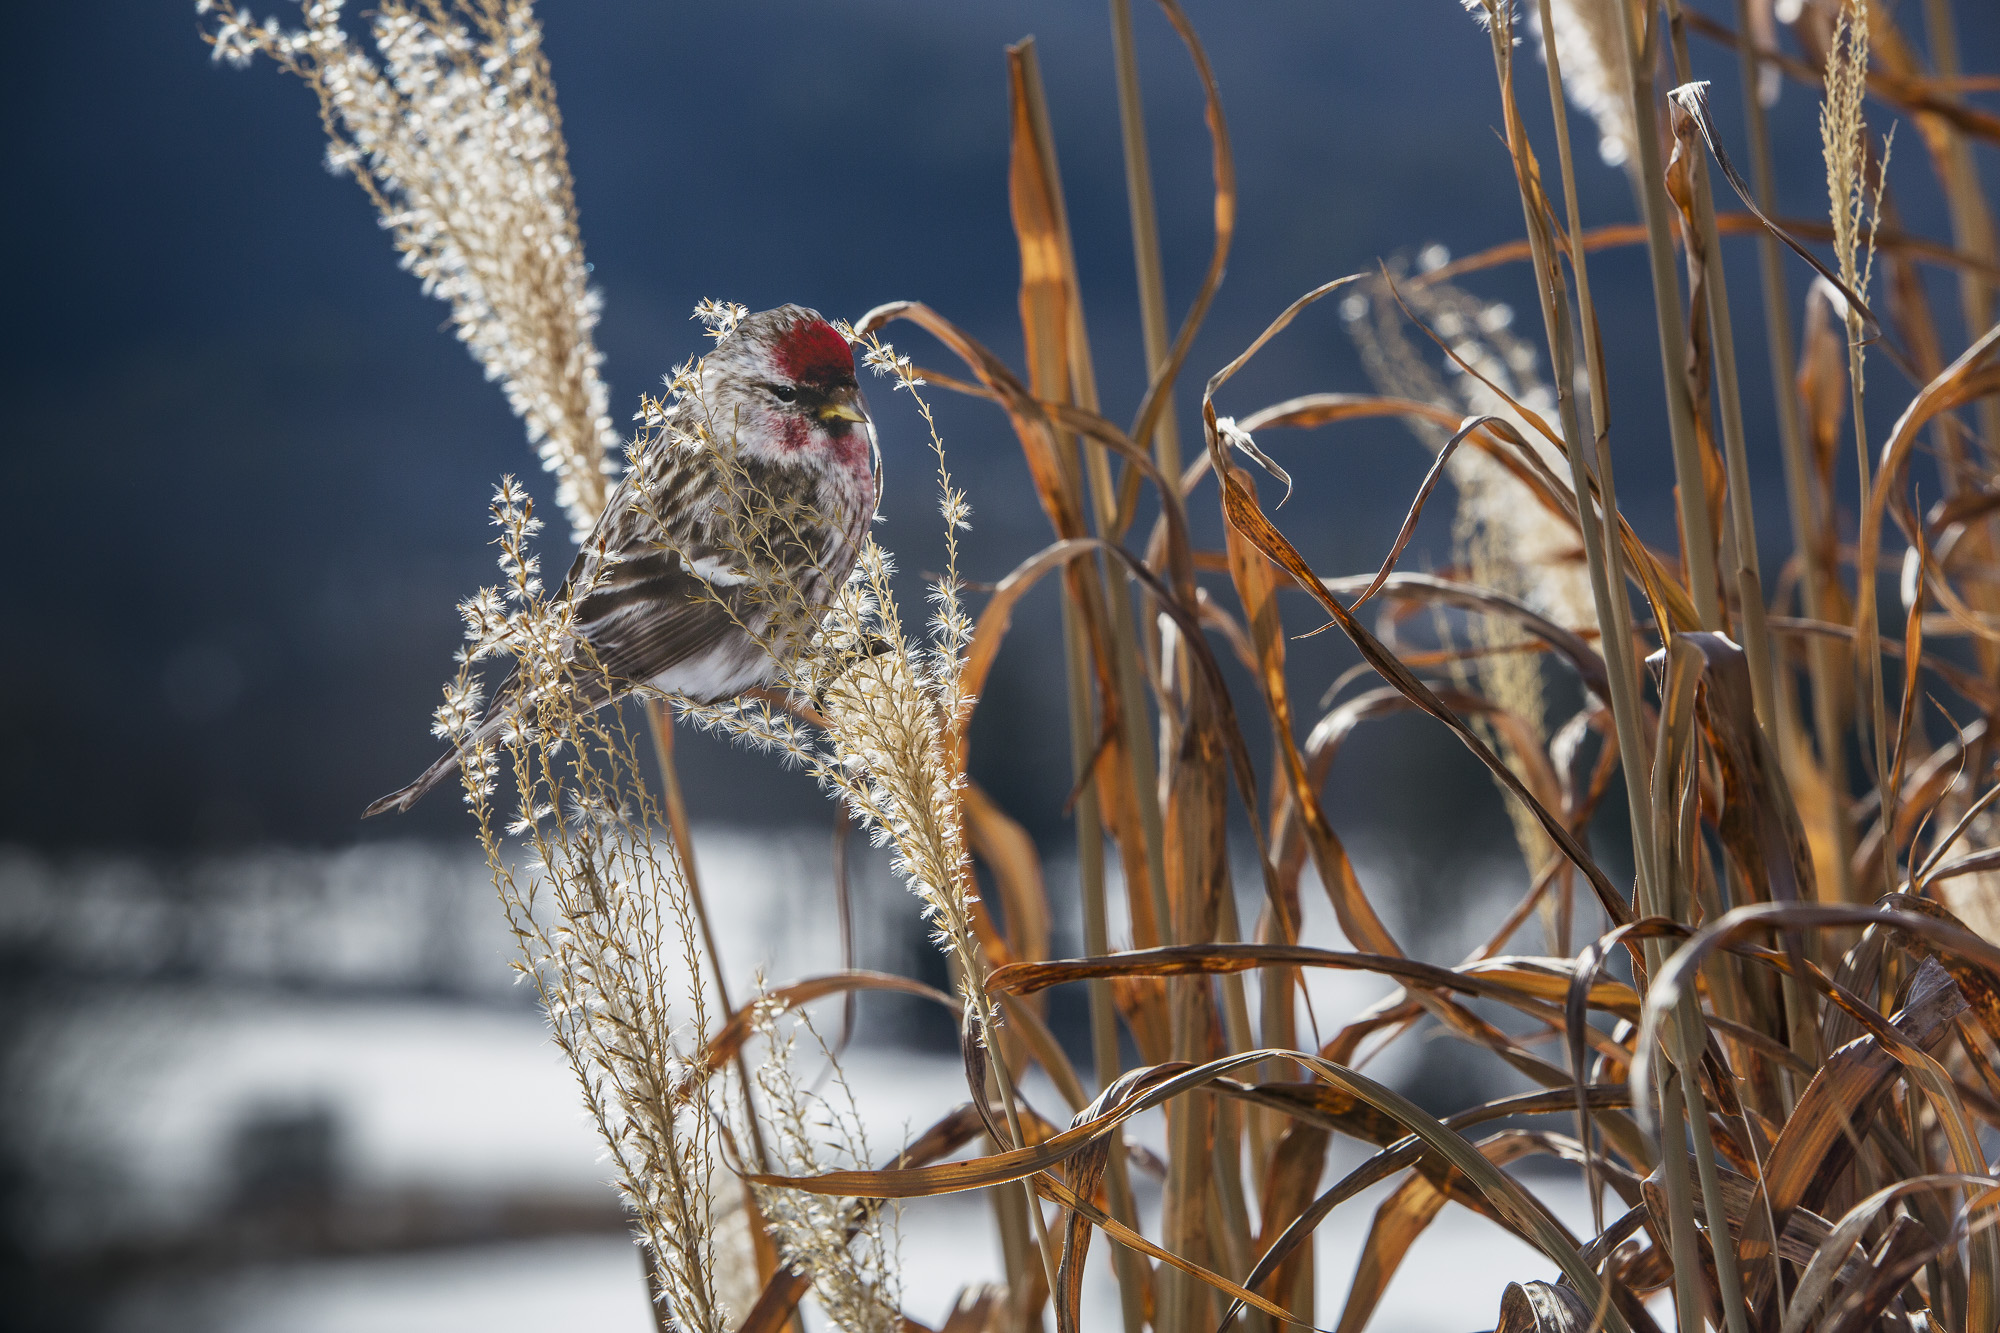 A paper cutout of a photograph of a Common Redpoll bird perched on dry grass stalks with snow on the ground and a dark blue sky in the background.